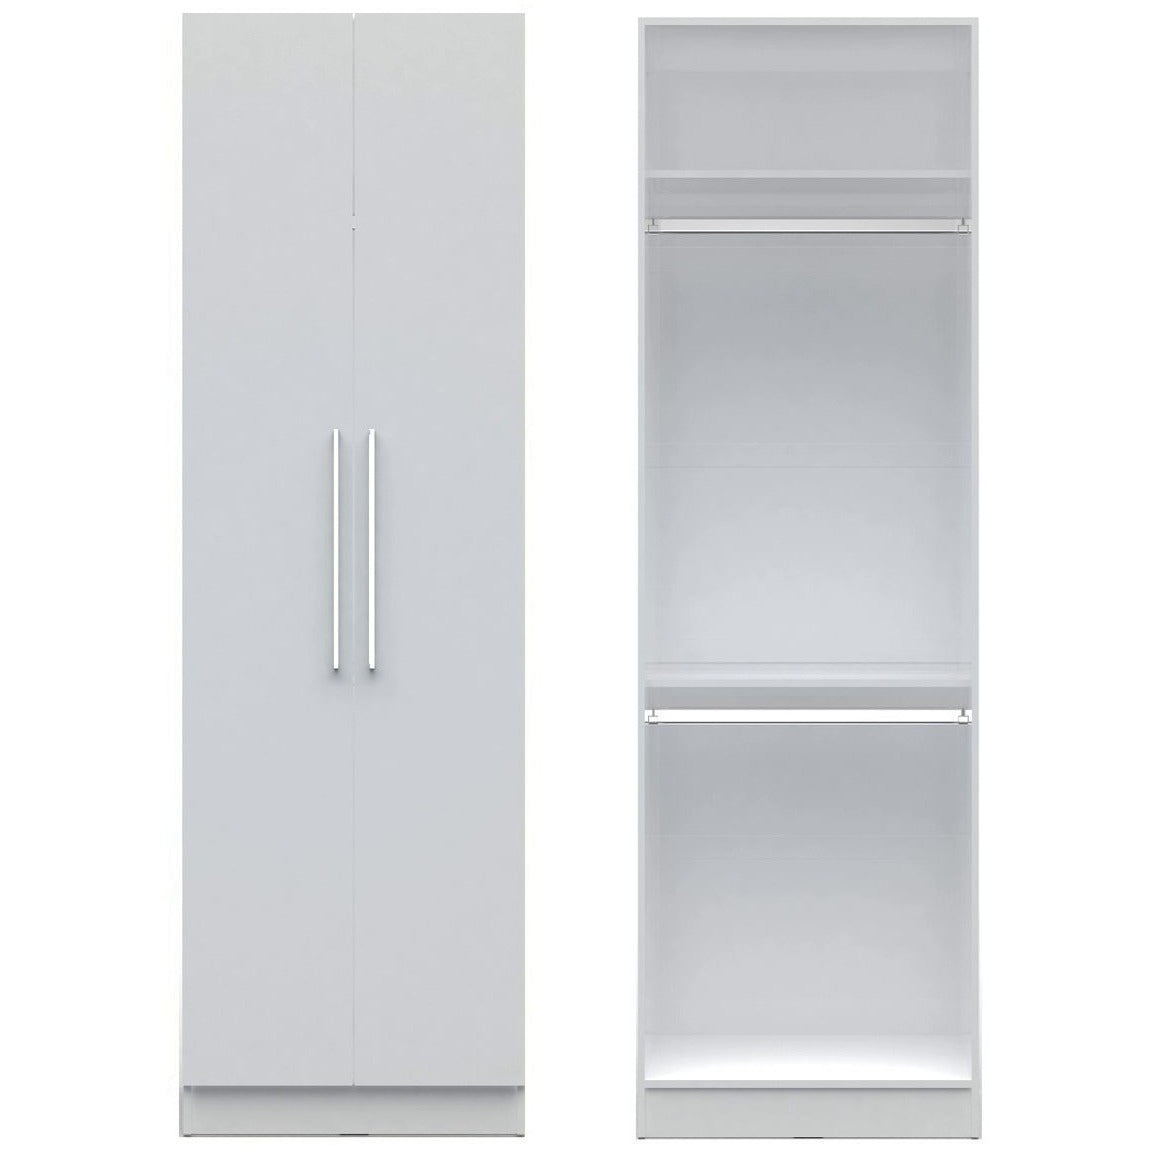 Manhattan Comfort Chelsea 1.0 - 27.55 inch Wide Double Hanging Closet with 2 Doors in White-Minimal & Modern